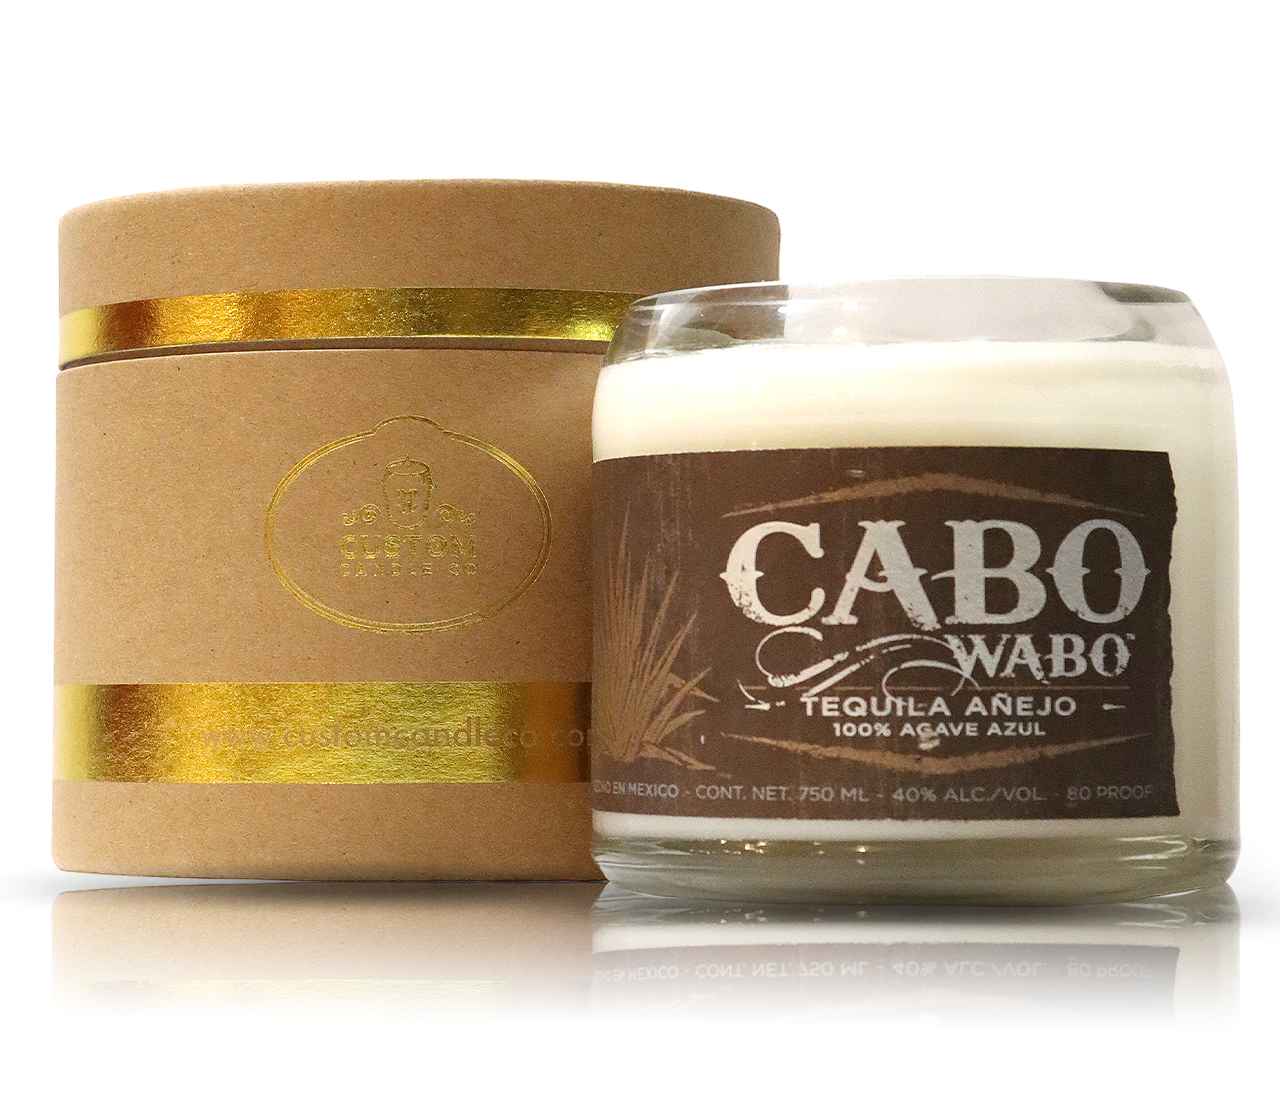 A Recycled Cabo Wabo Anejo Tequila Candle with a gold box next to it.